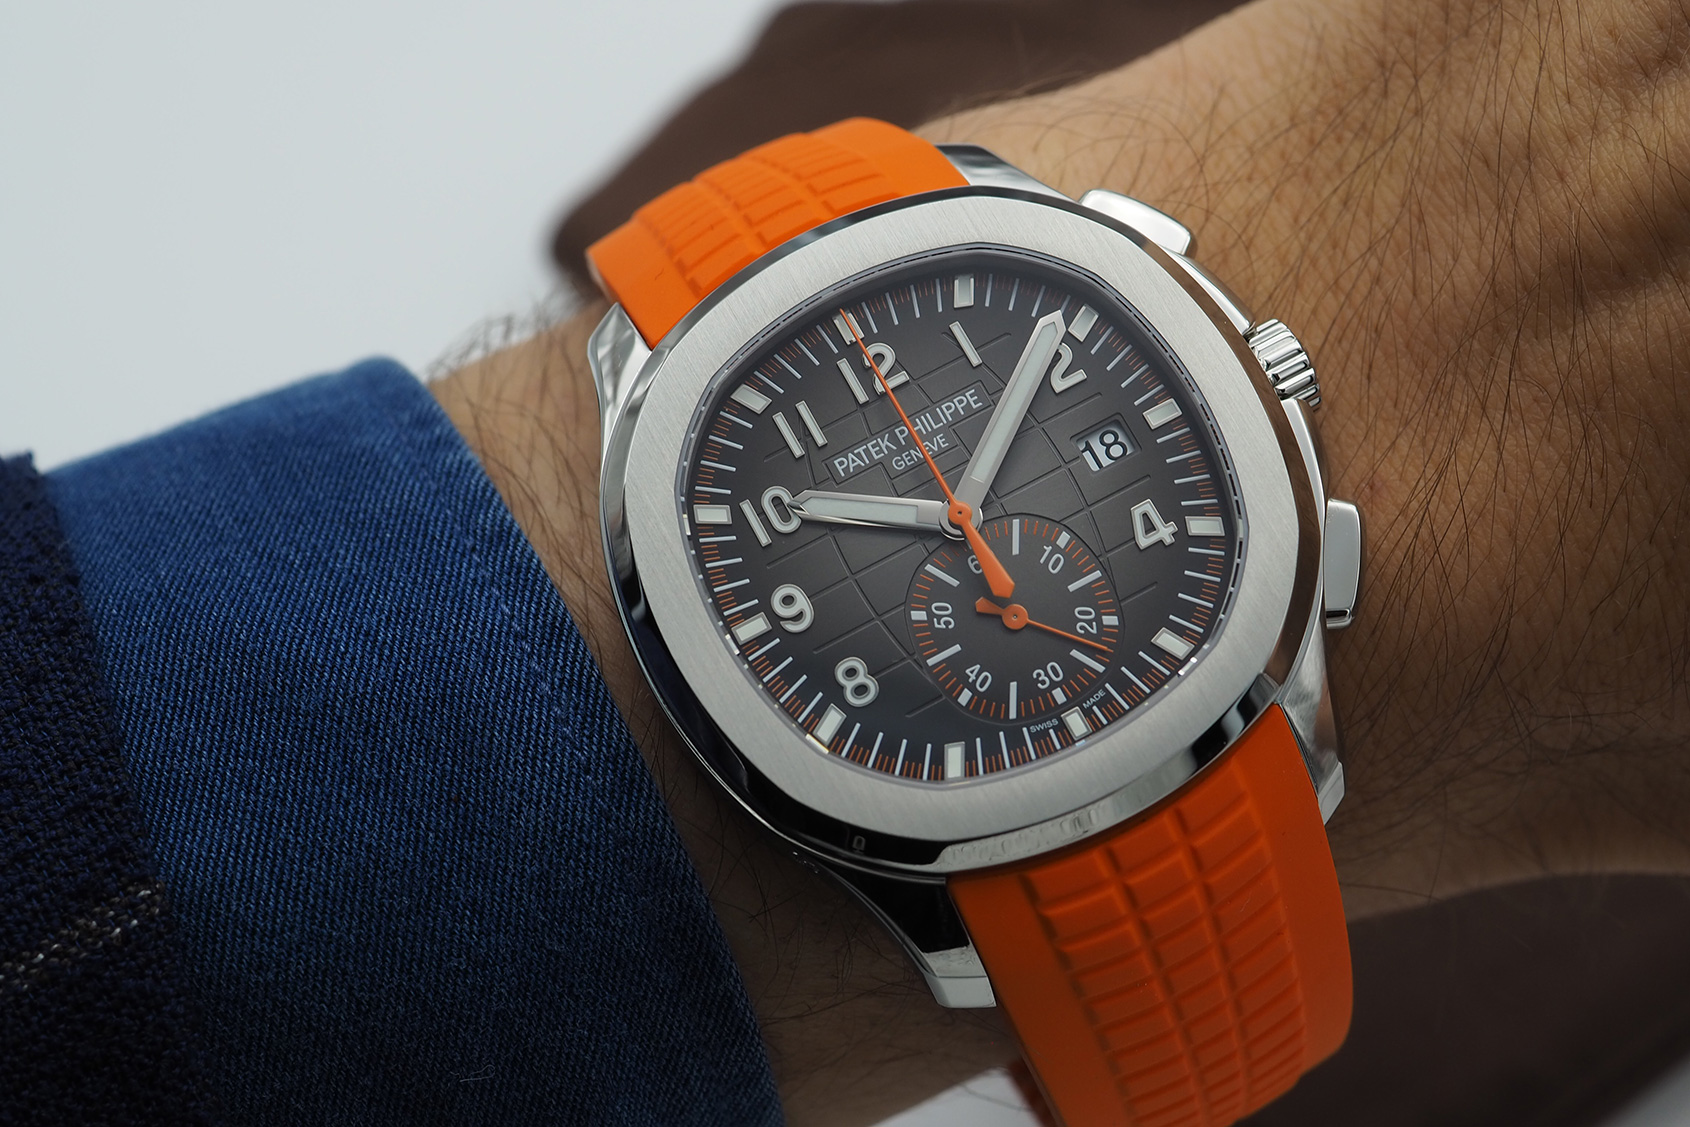 Orange you glad we wrote this list? Our orange watches from last year